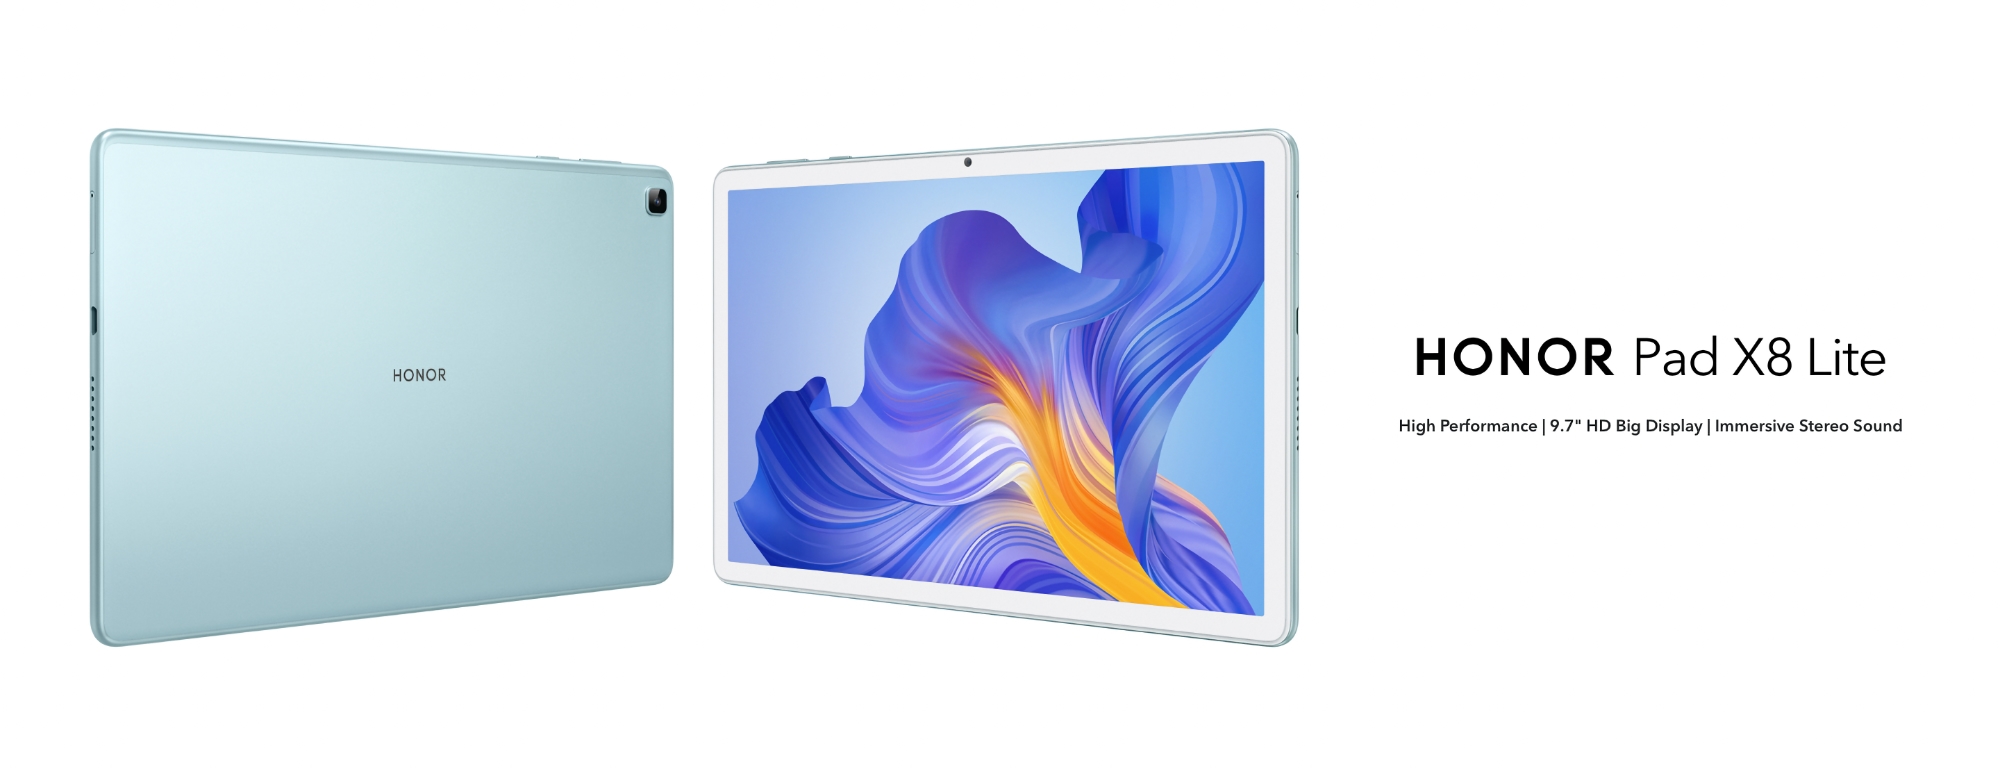 Honor Pad X8 Lite: tablet with 9.7-inch screen, MediaTek Helio G80 chip and 5100mAh battery